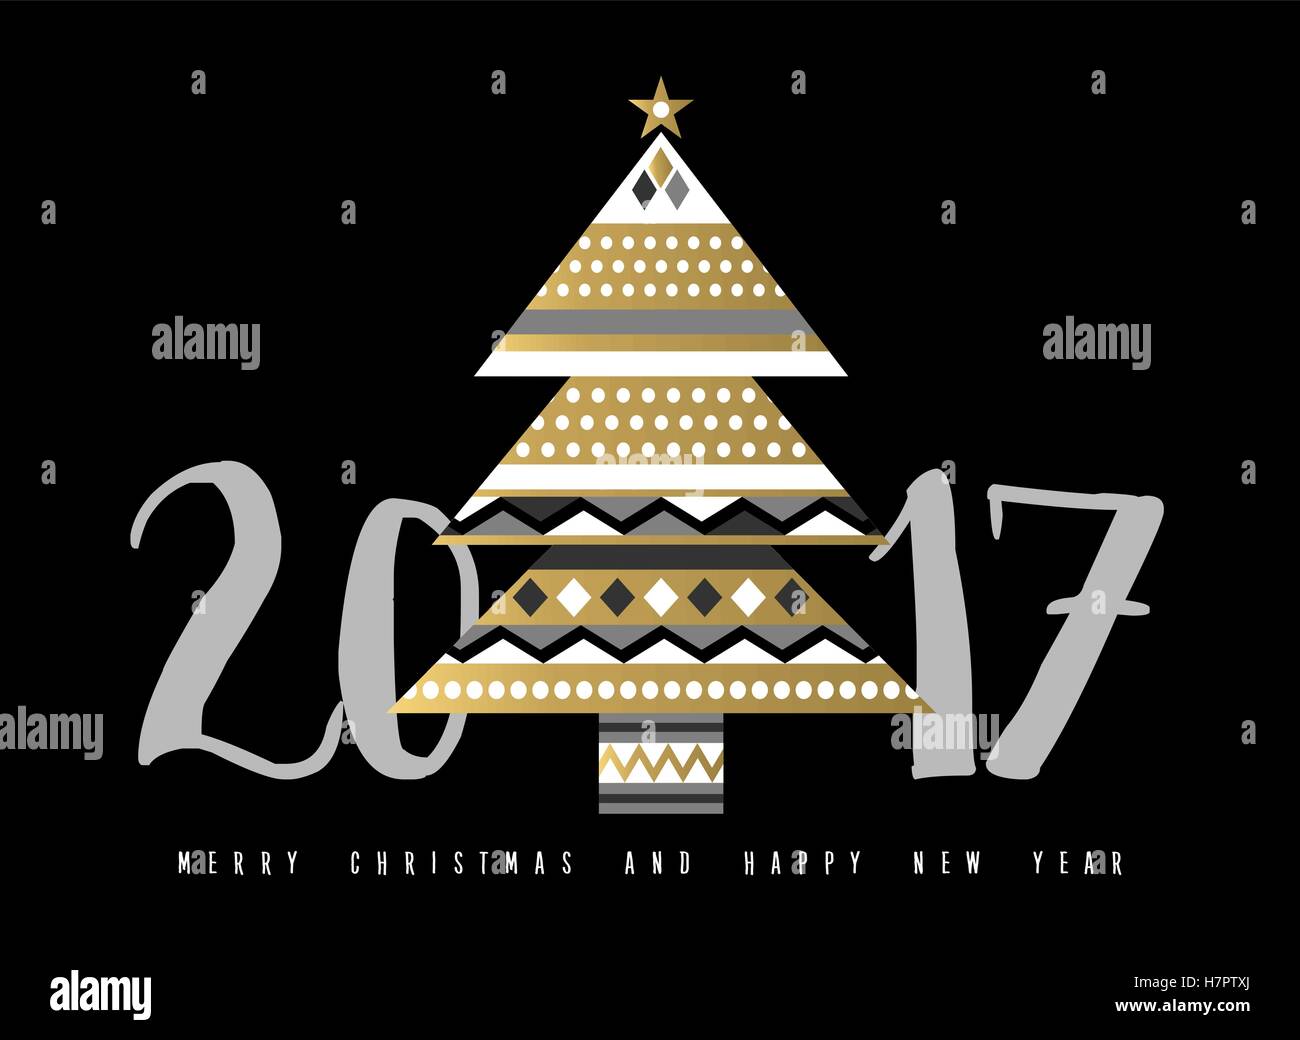 Happy New Year 2017 greeting card design with gold christmas pine tree made of abstract elegant geometric shapes. EPS10 vector Stock Vector